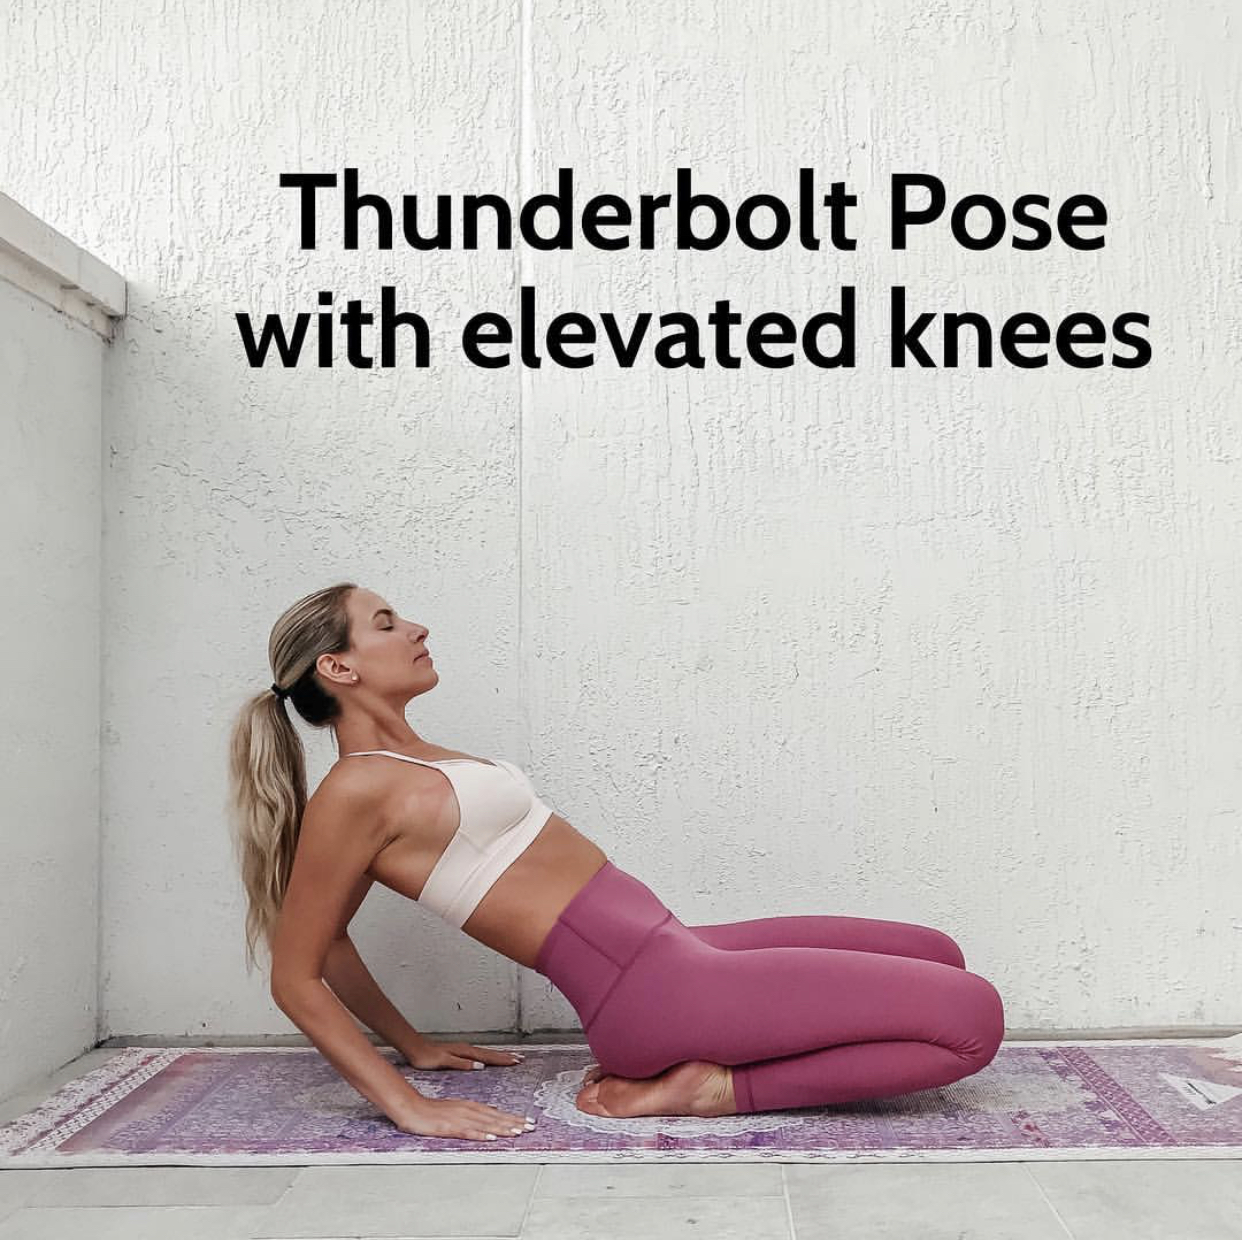  Thunderbolt Pose with Elevated Knees x 10 deep breaths. 